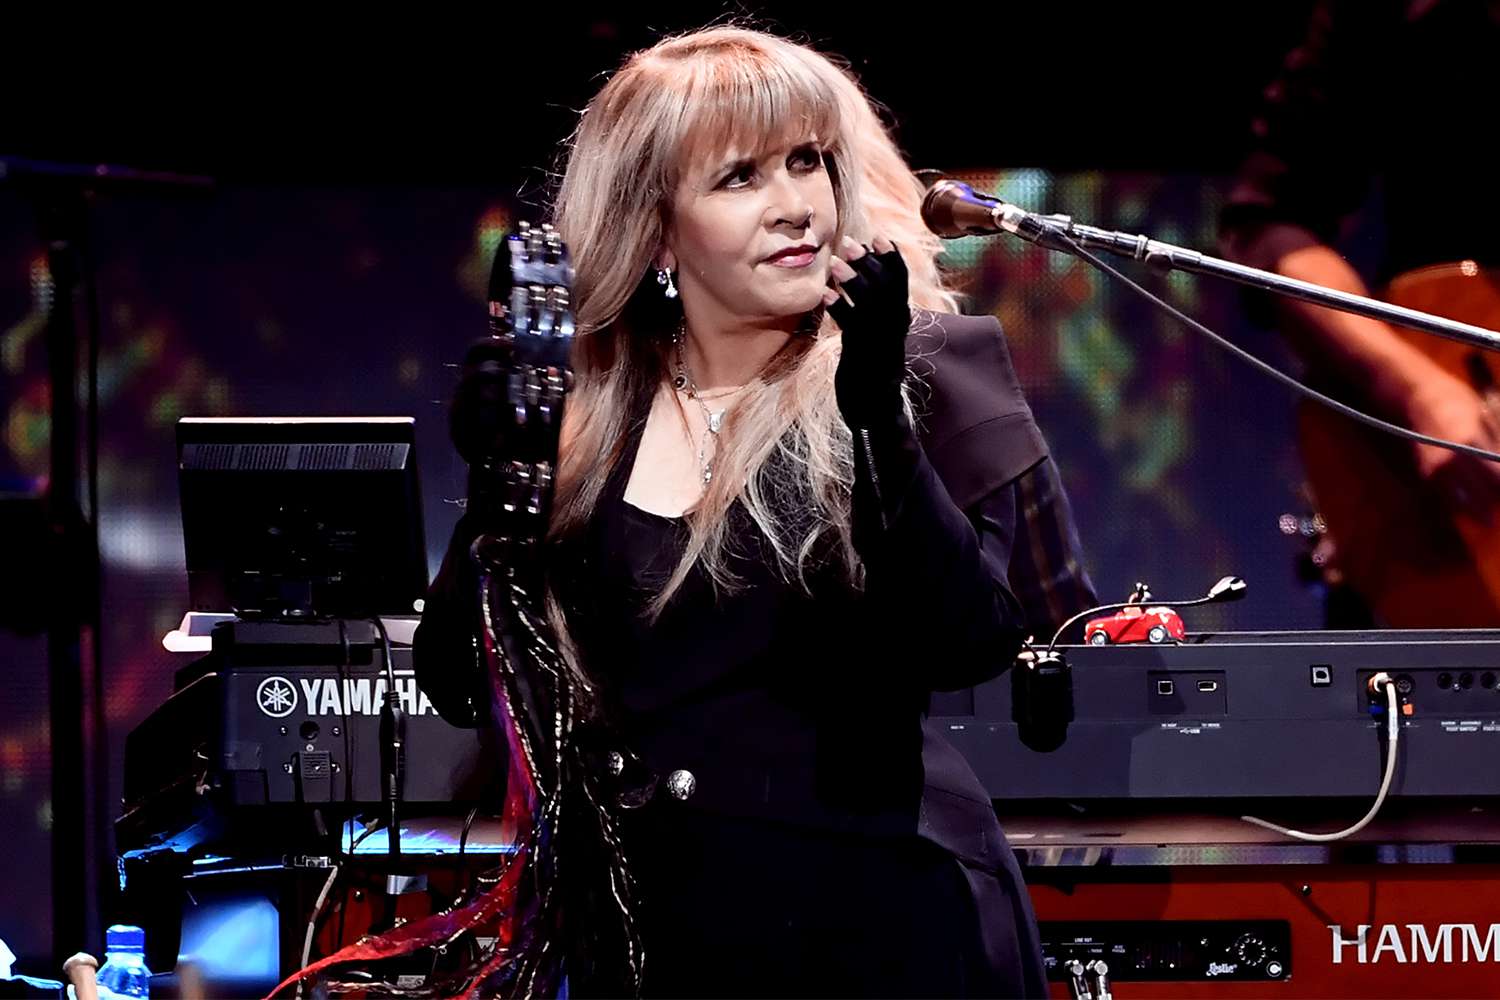 Stevie Nicks of Fleetwood Mac performs onstage during the 2018 iHeartRadio Music Festival at T-Mobile Arena on September 21, 2018 in Las Vegas, Nevada.